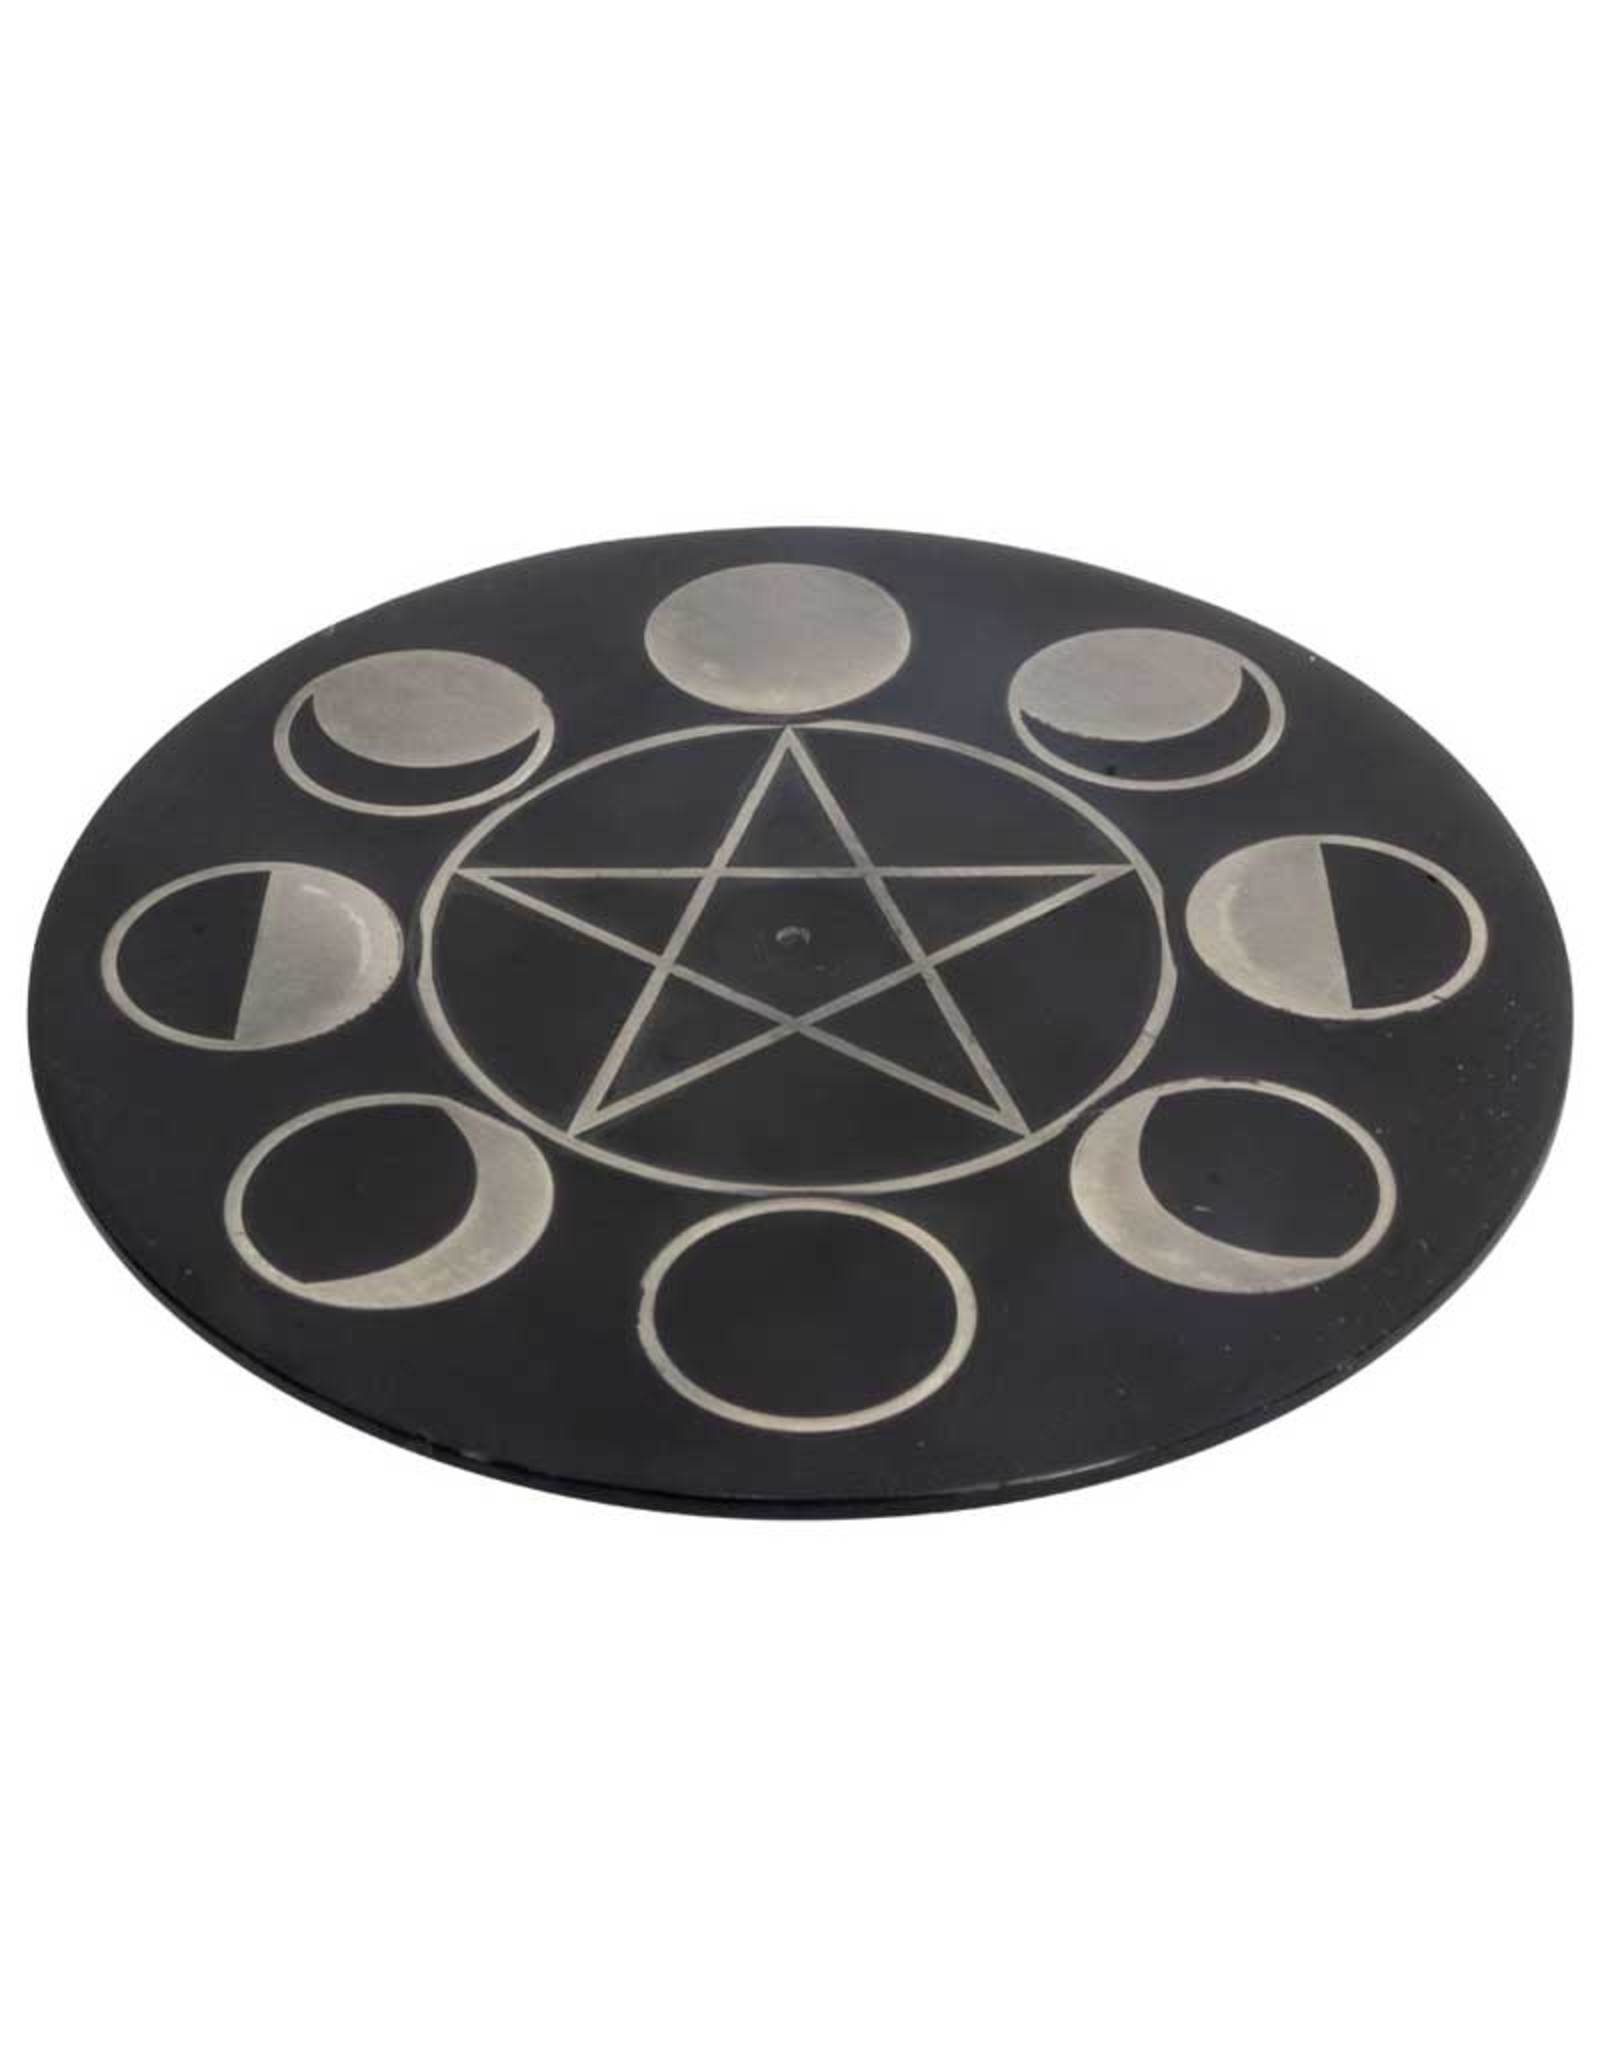 Soapstone Pentacle and Moon Incense Burner